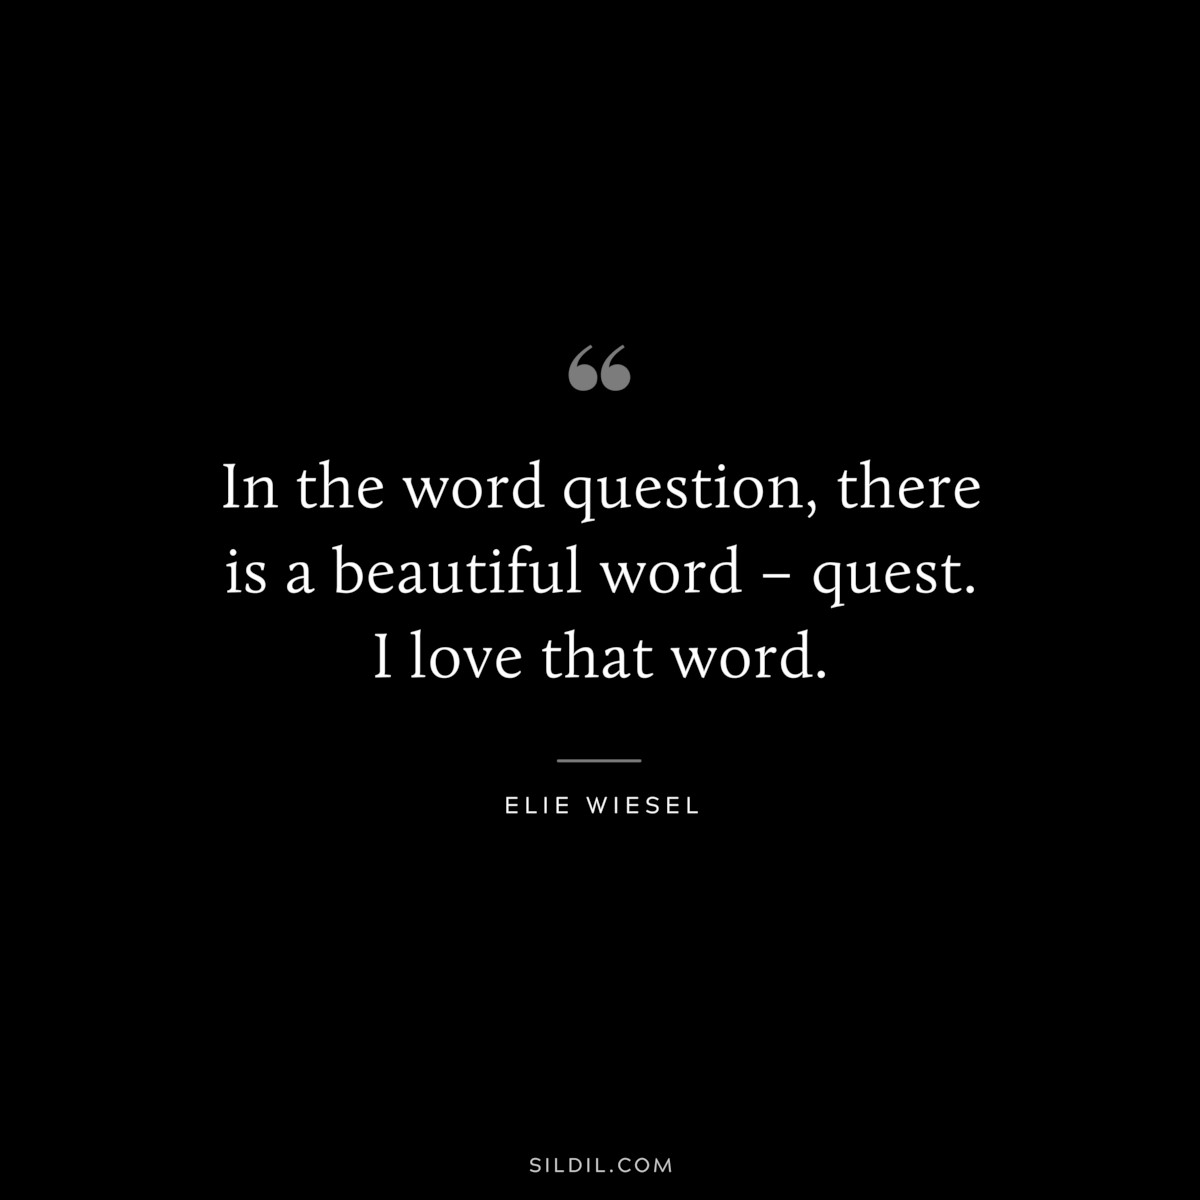 In the word question, there is a beautiful word – quest. I love that word. ― Elie Wiesel